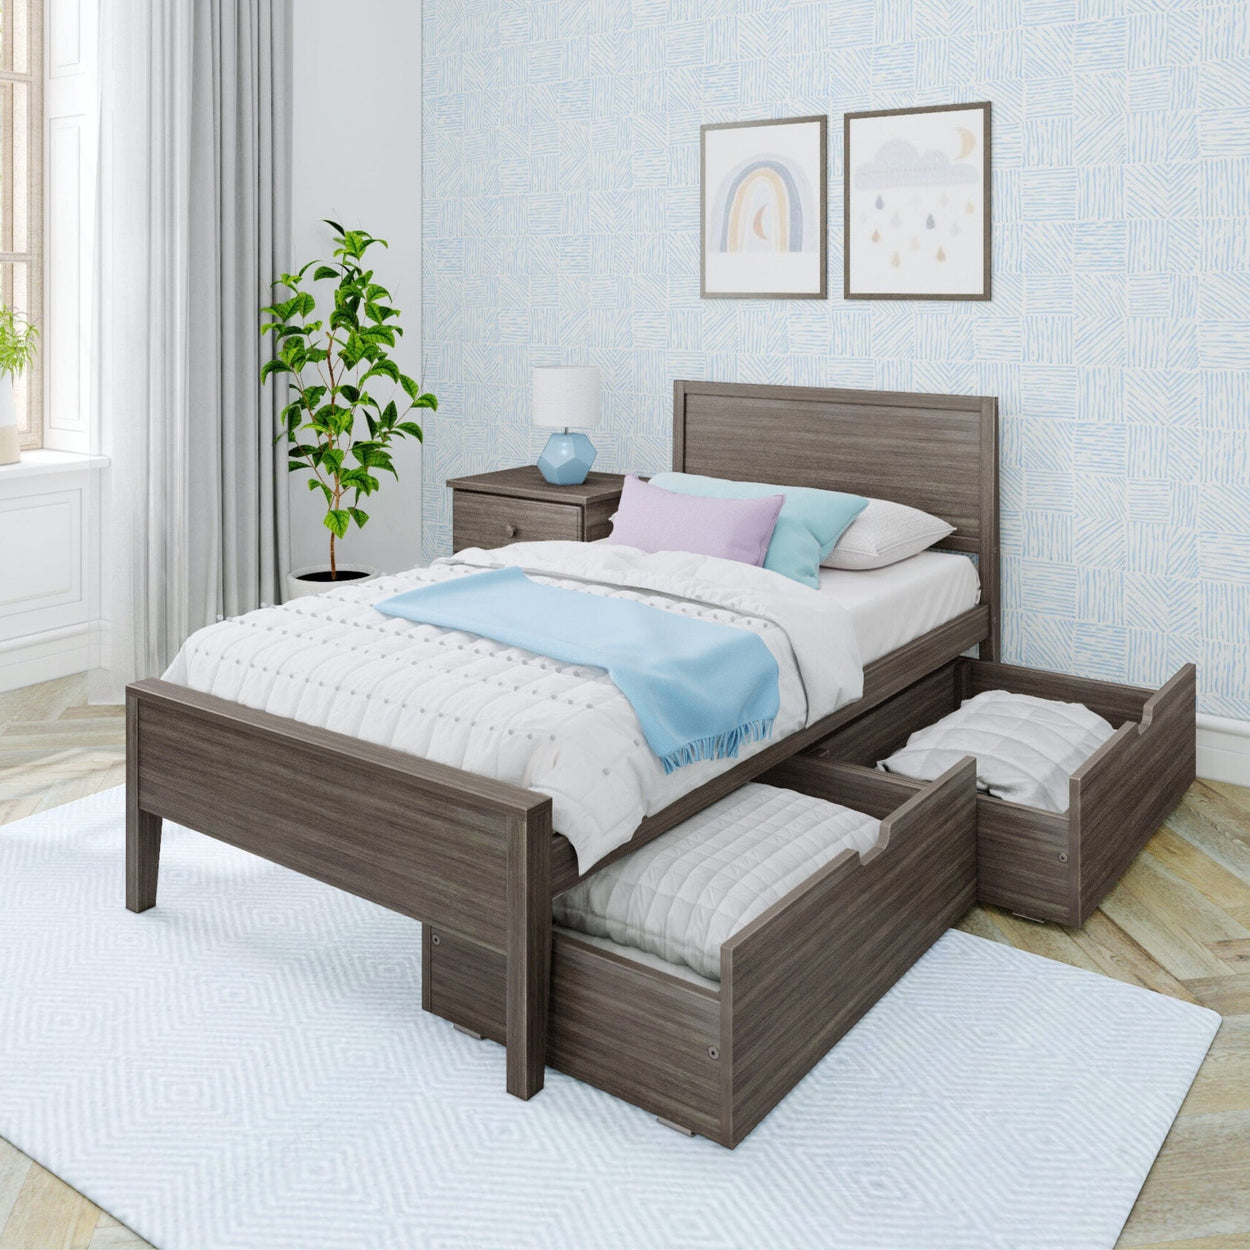 187100-151 : Kids Beds Classic Twin-Size Bed with Panel Headboard and Storage Drawers, Clay